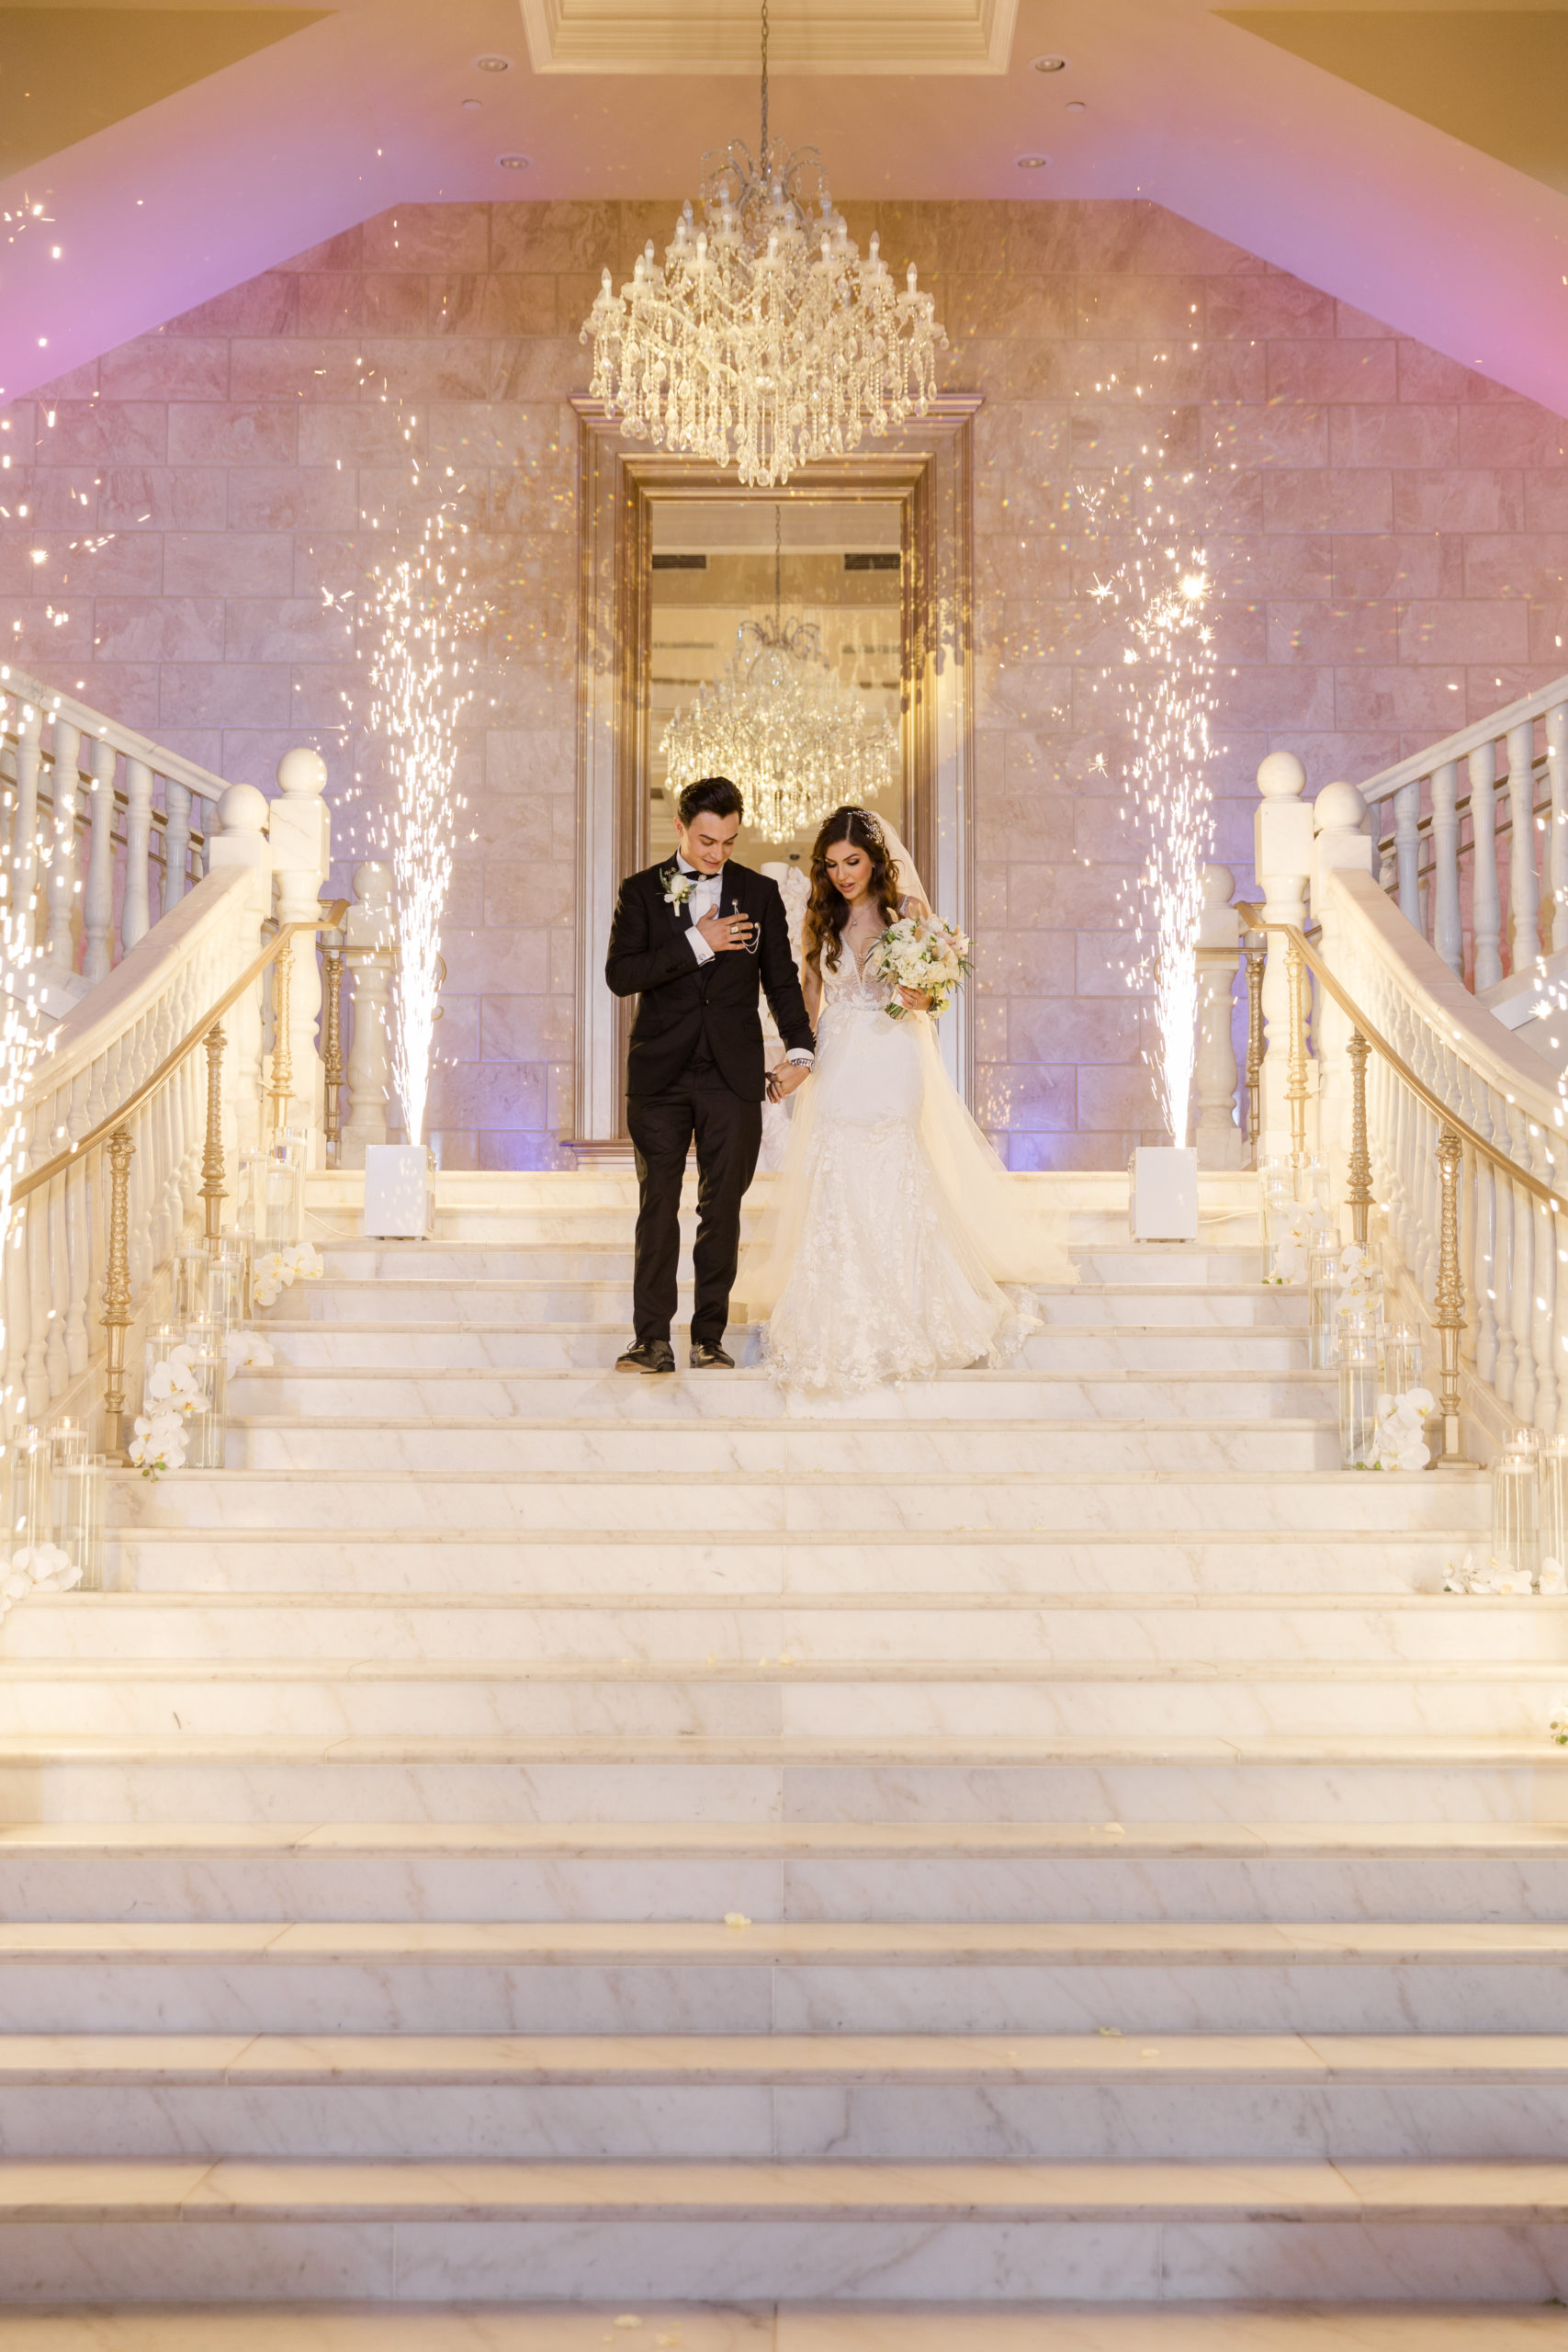 Bride and groom holding hands as they descend down the luxurious walkway to their ceremony location wth a chandelier above and fountain fireworks